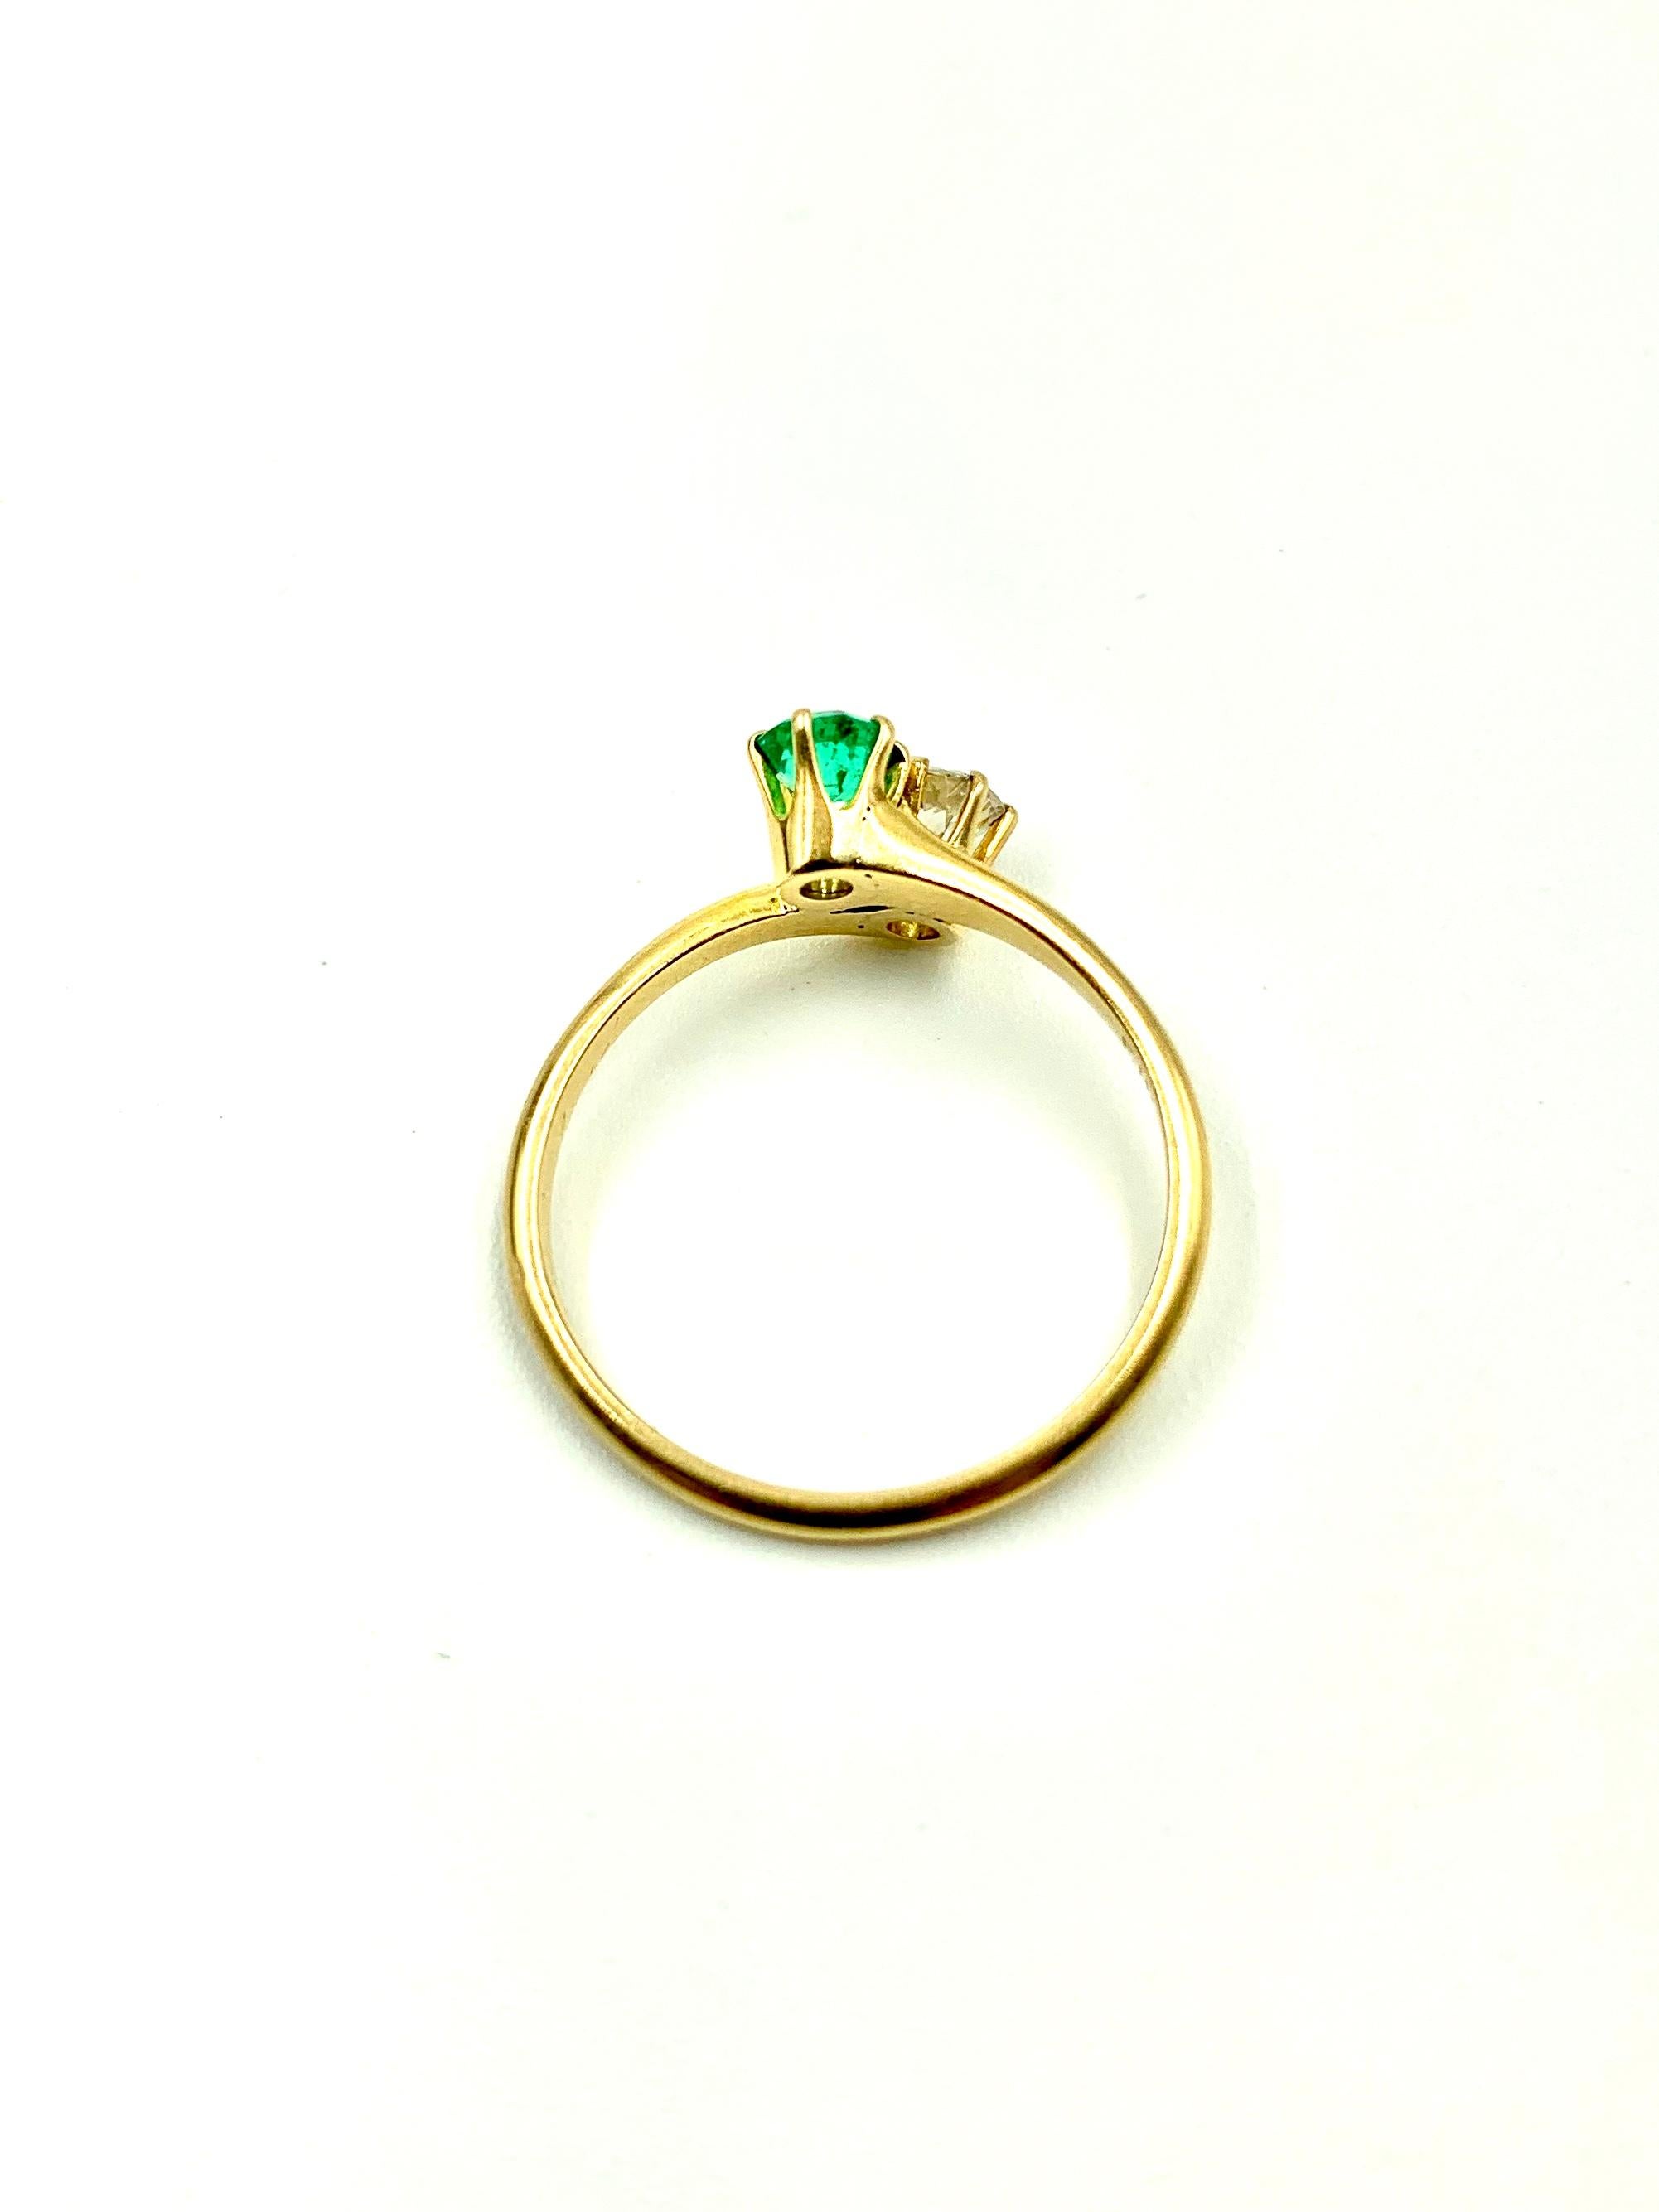 18k gold ring with emerald stone